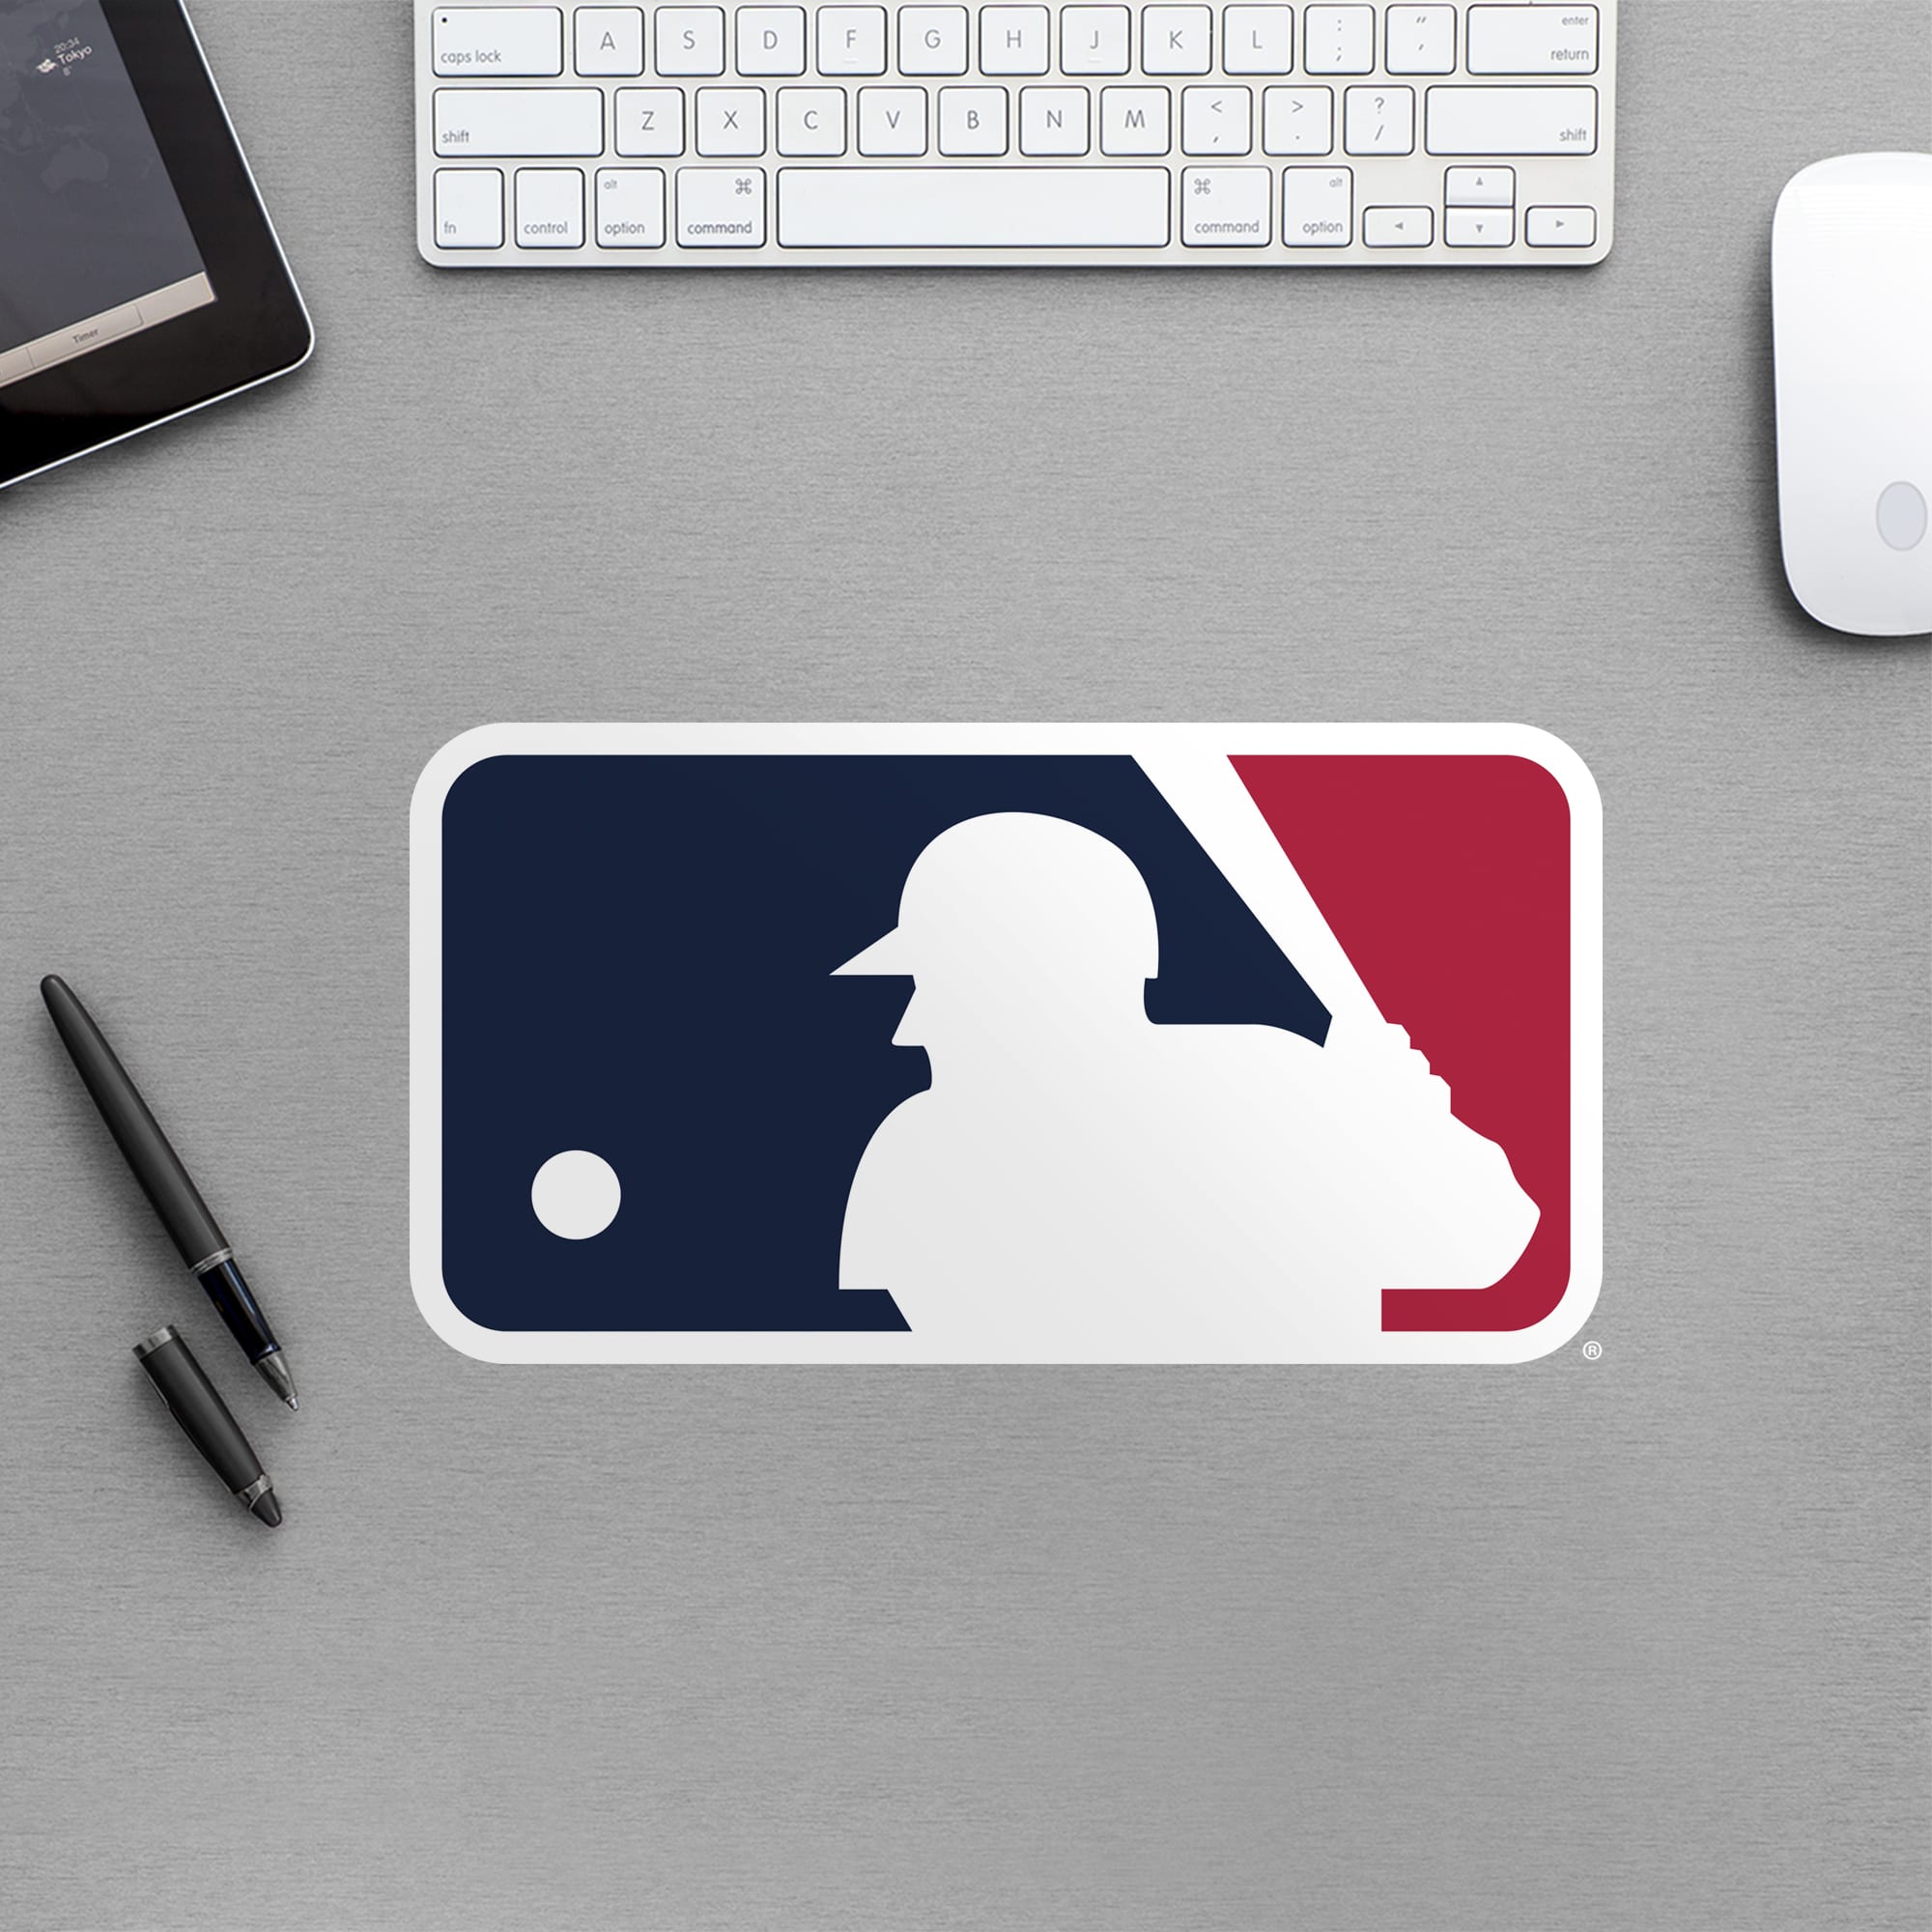 MLB: Logo - Officially Licensed MLB Removable Wall Decal Large by Fathead | Vinyl